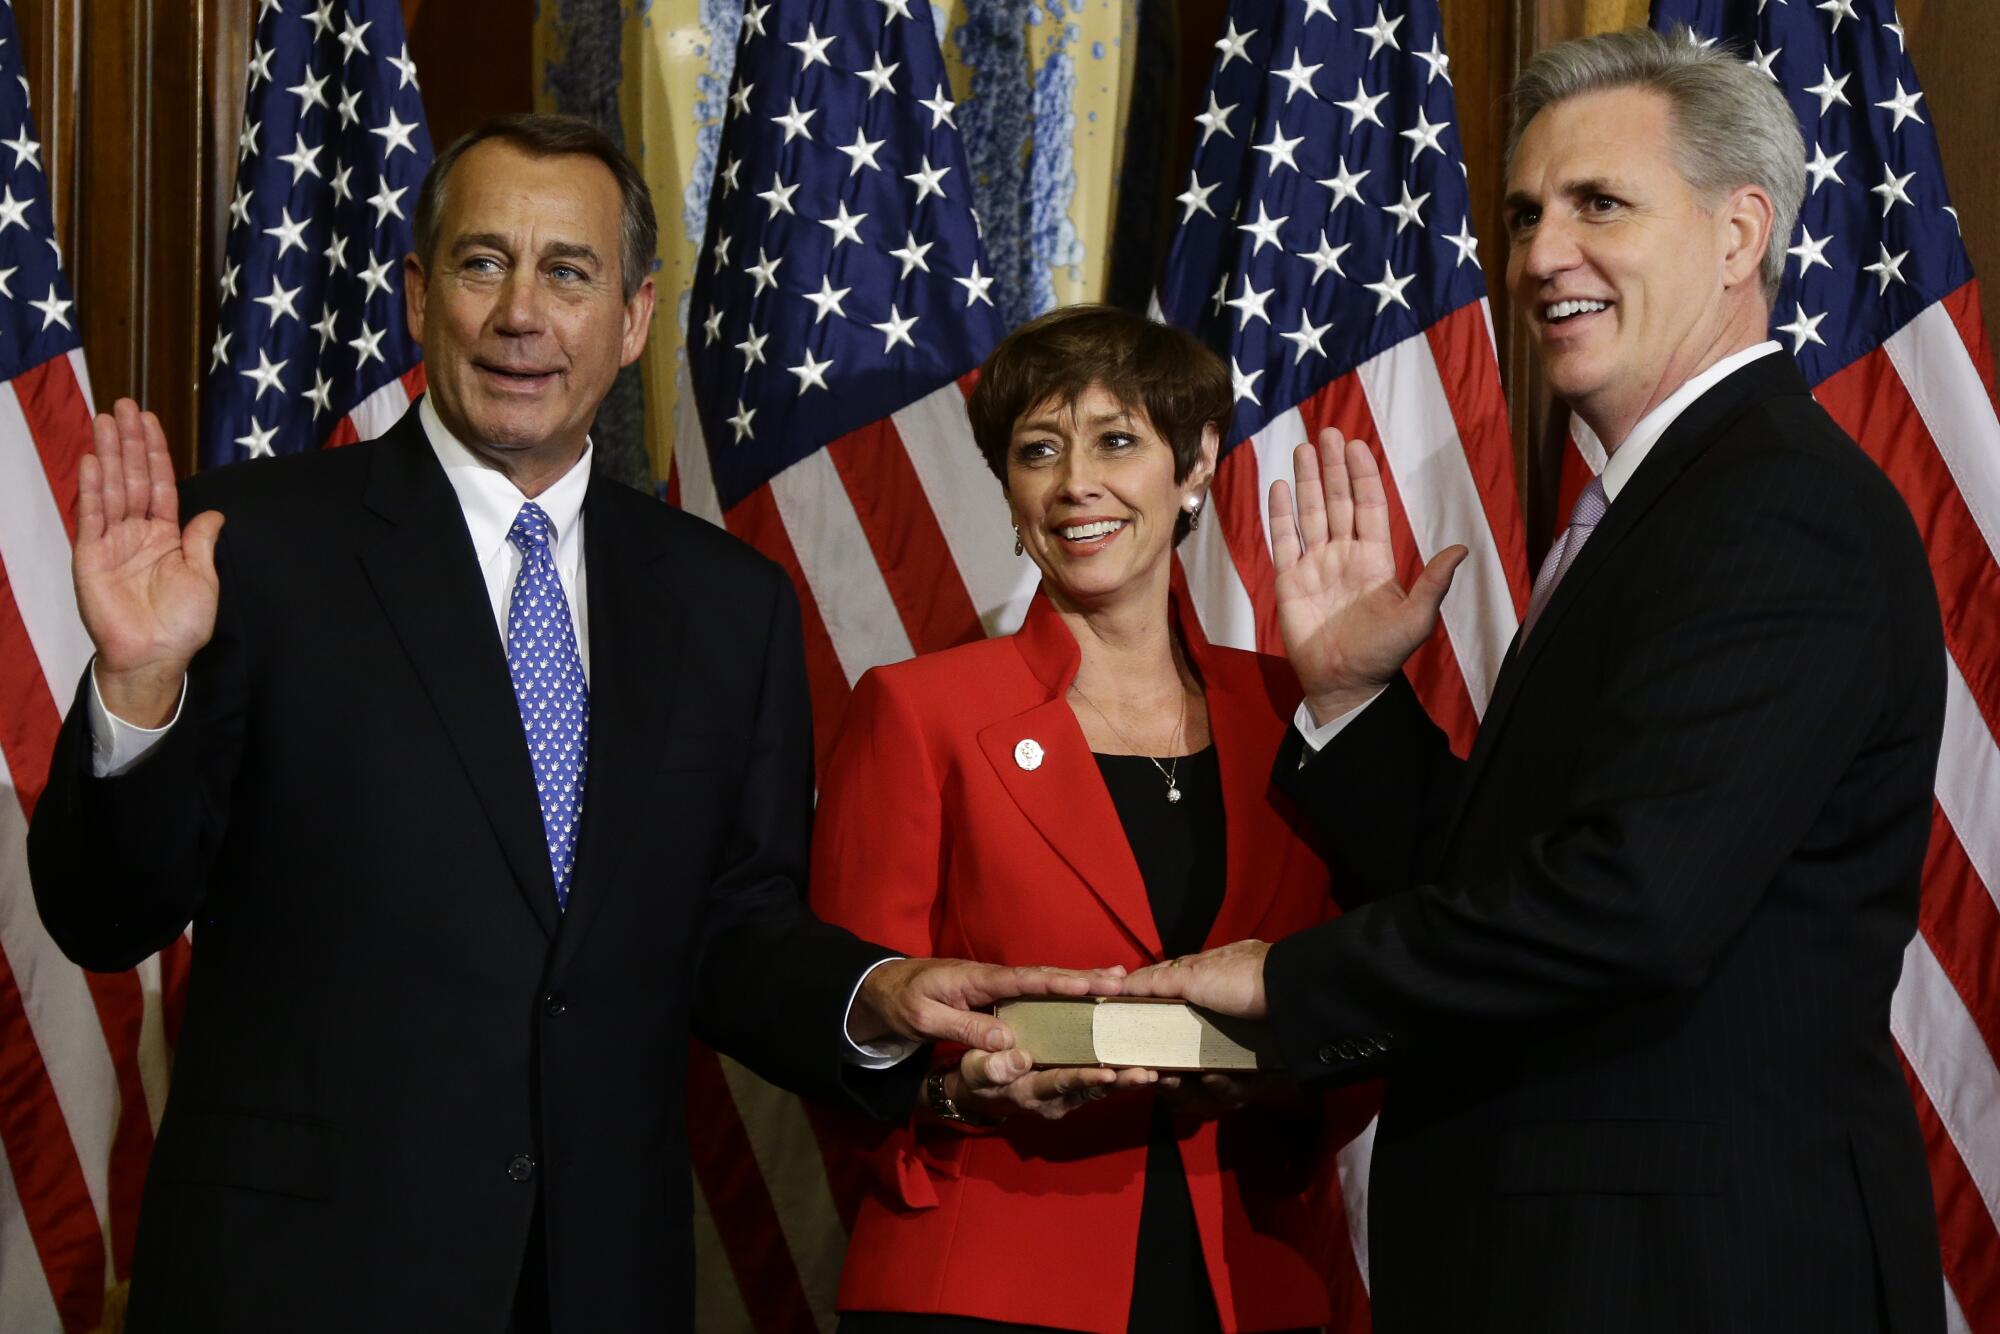 Two men in suits each hold up a hand and rest the other hand on a book held by a woman between them in front of flags.